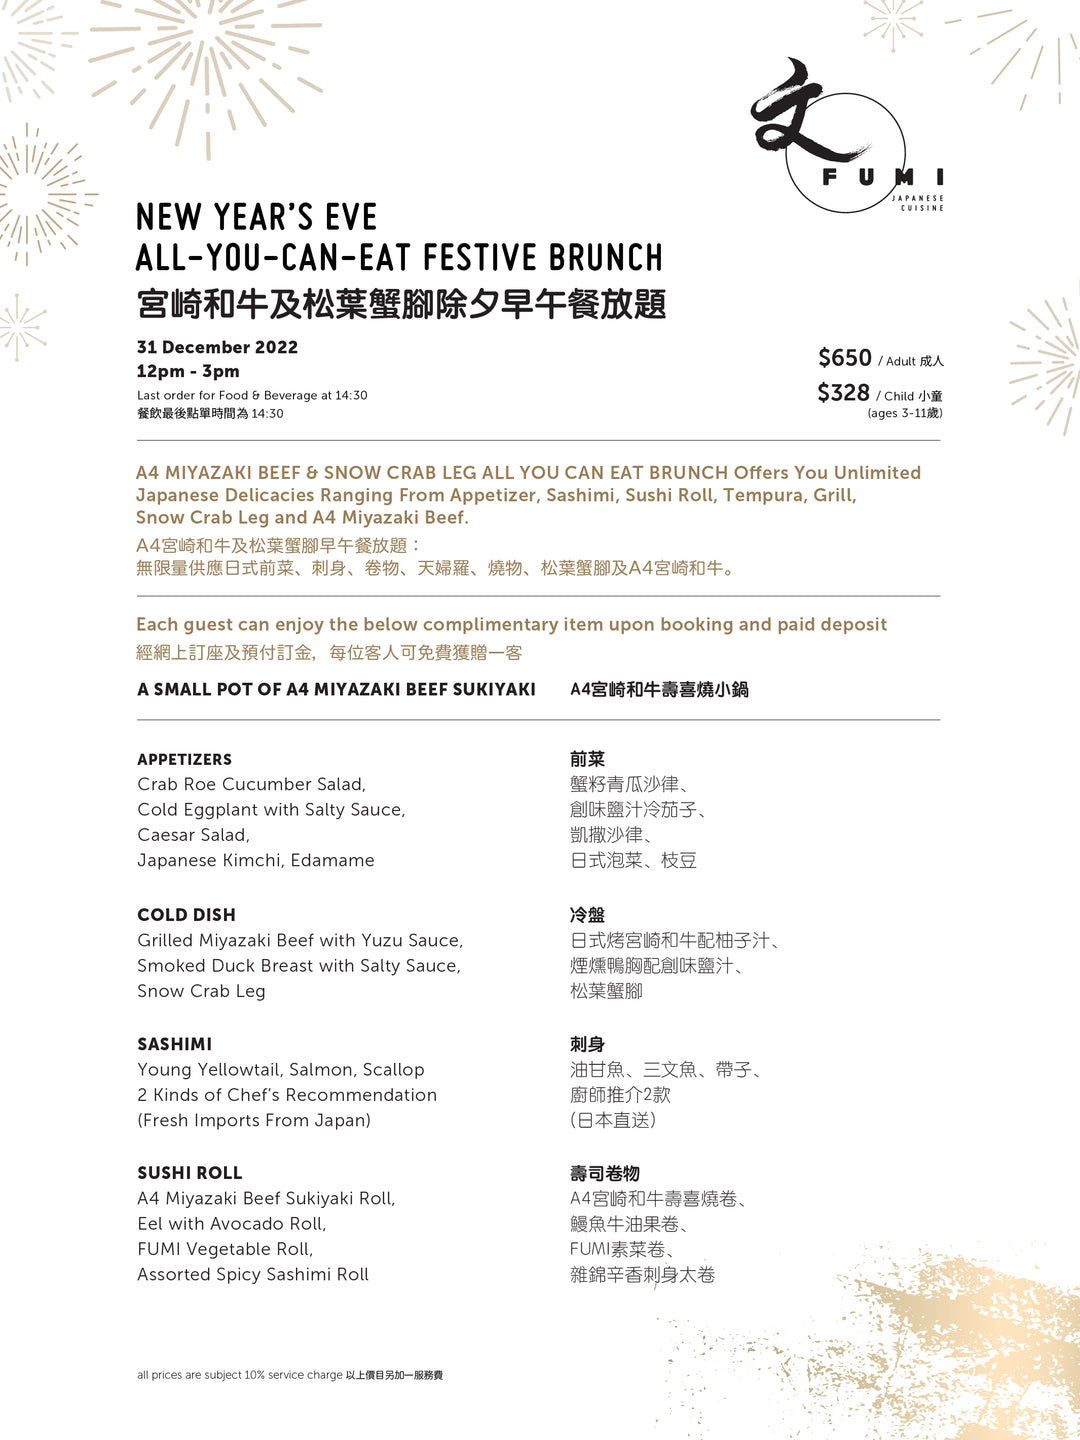 FUMI New Year's Eve Brunch